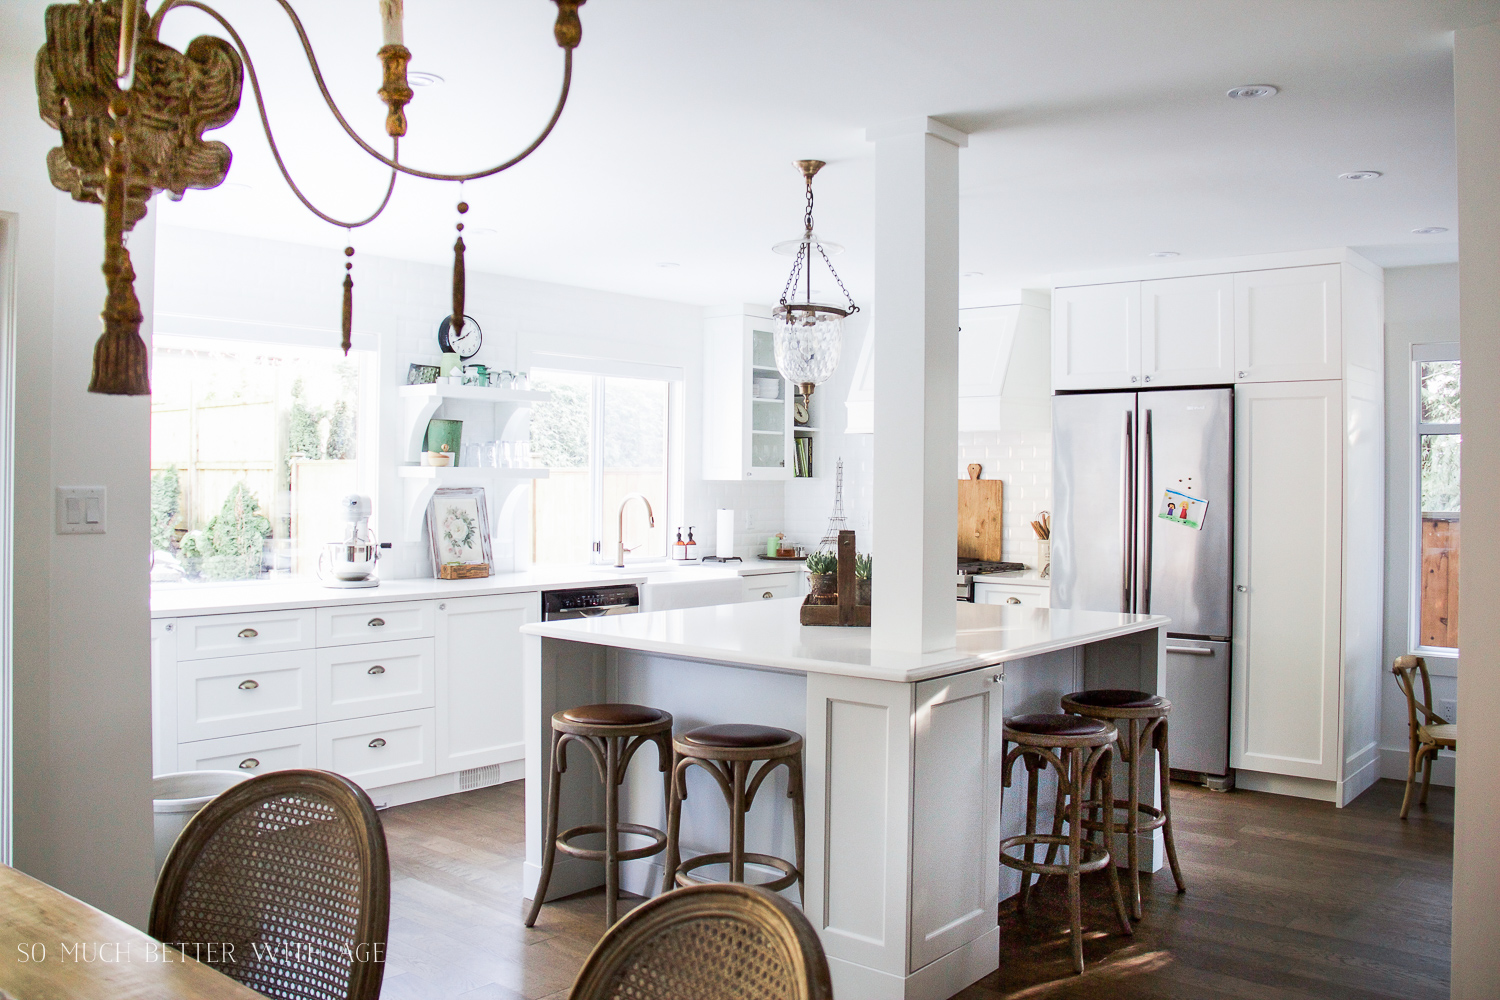  A chandelier is in the kitchen by the dining room table.